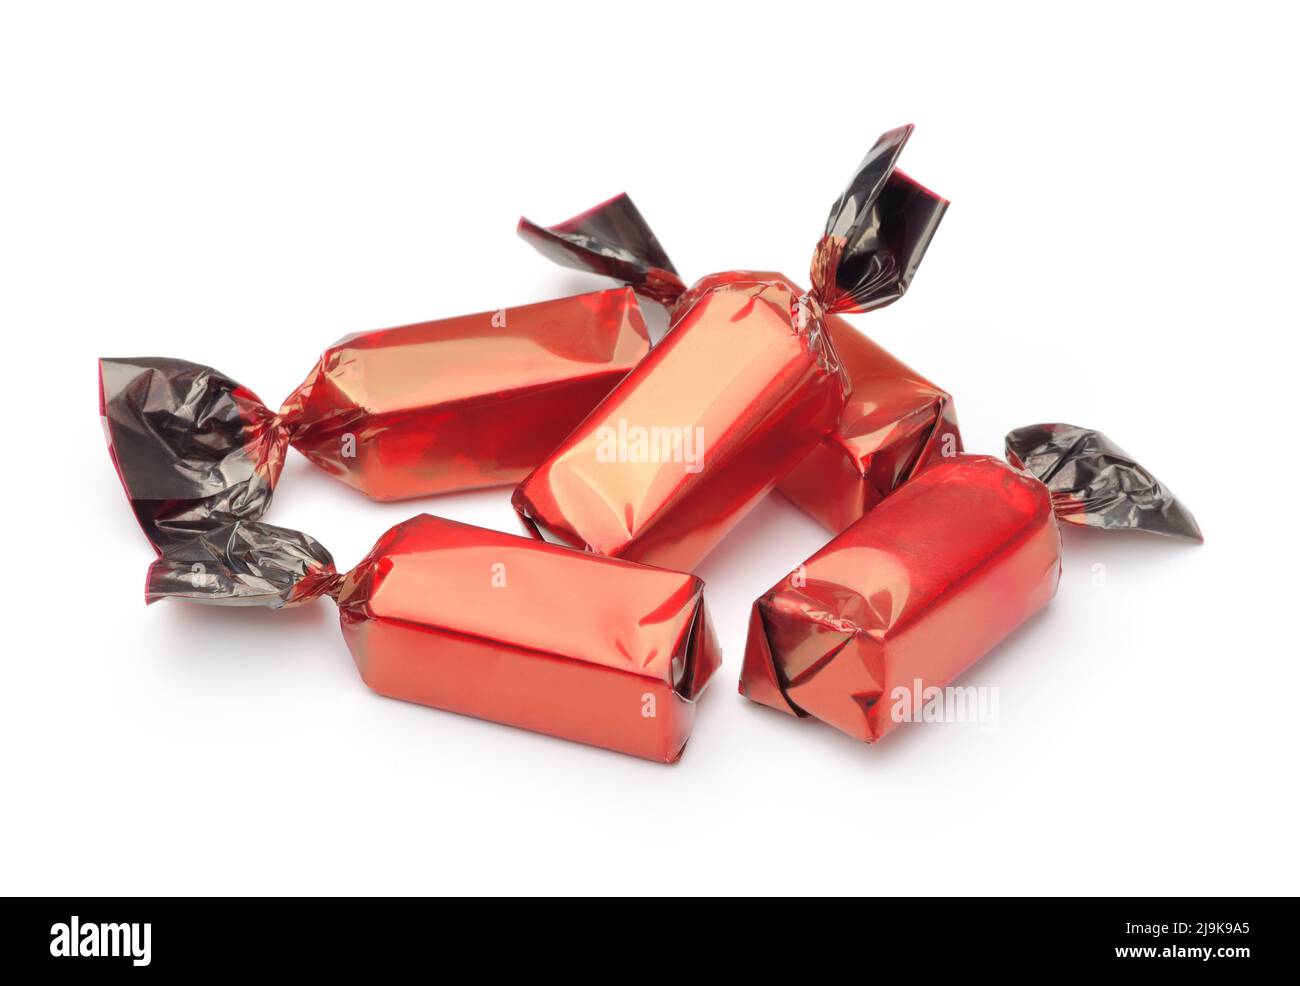 Group of chocolate candies wrapped in red wrappers isolated on white Stock Photo